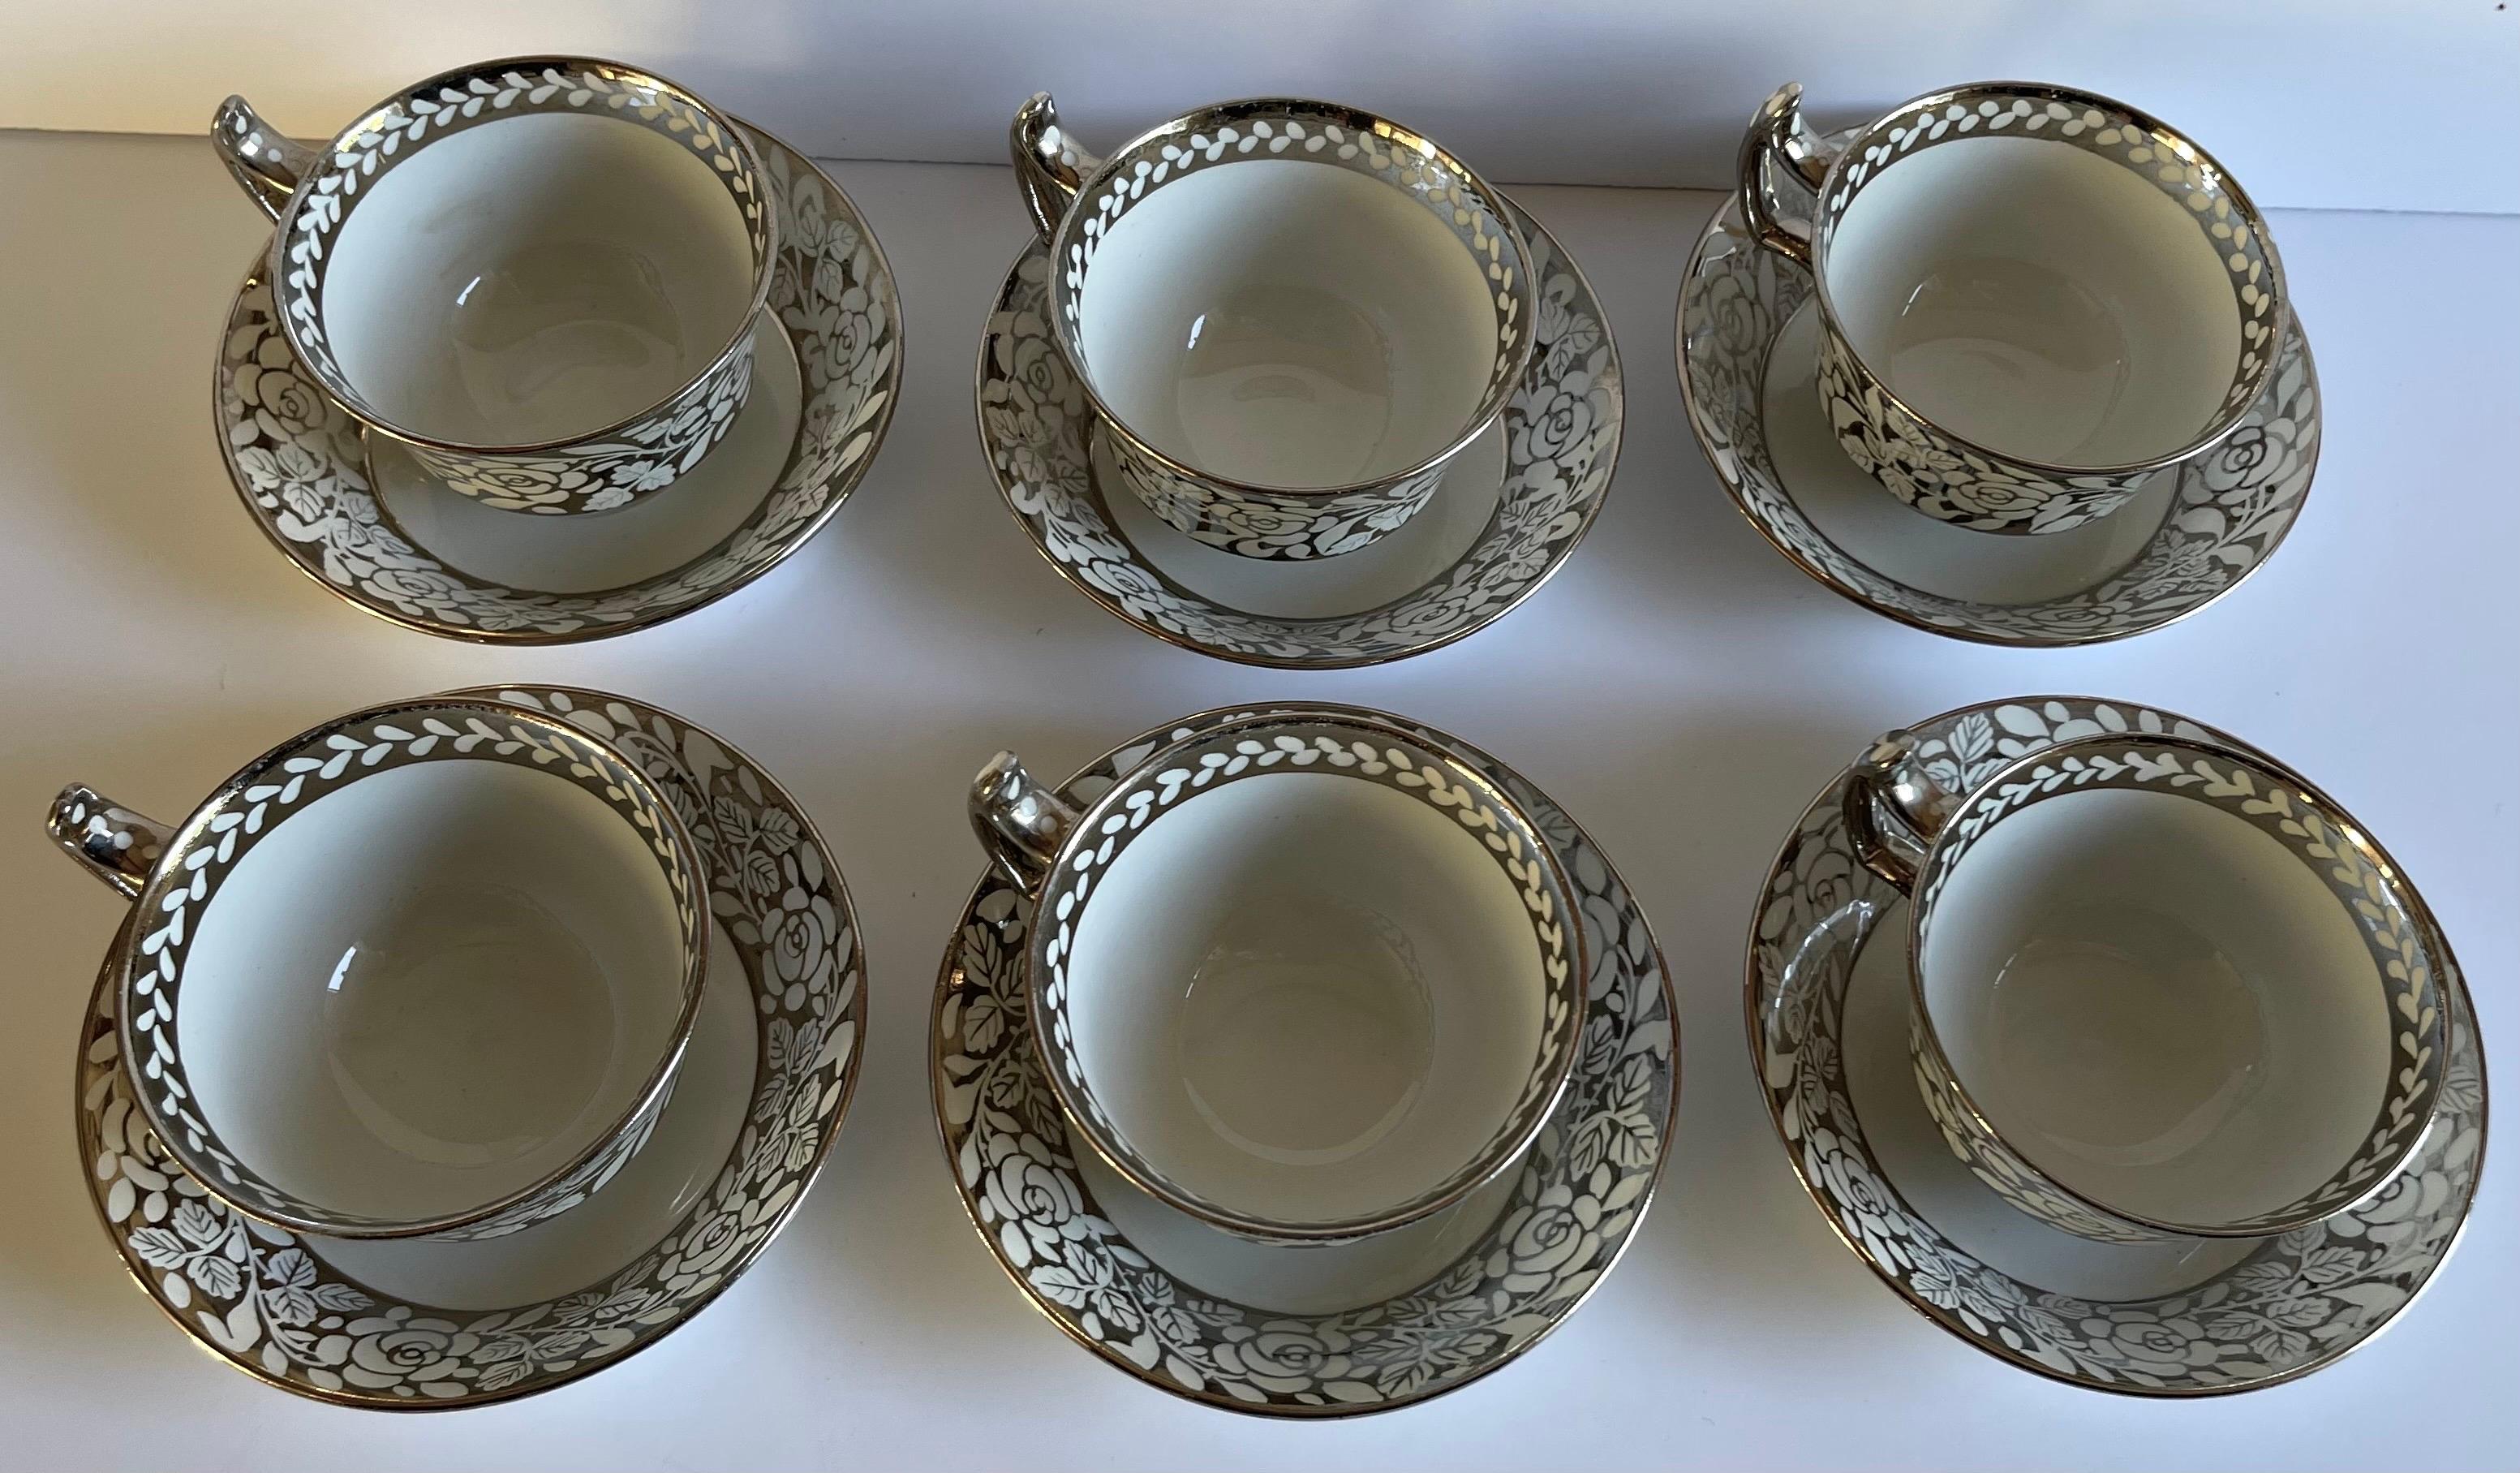 Painted 1930s Wedgwood Lustreware Tea Cups & Saucers, Set of 6 For Sale